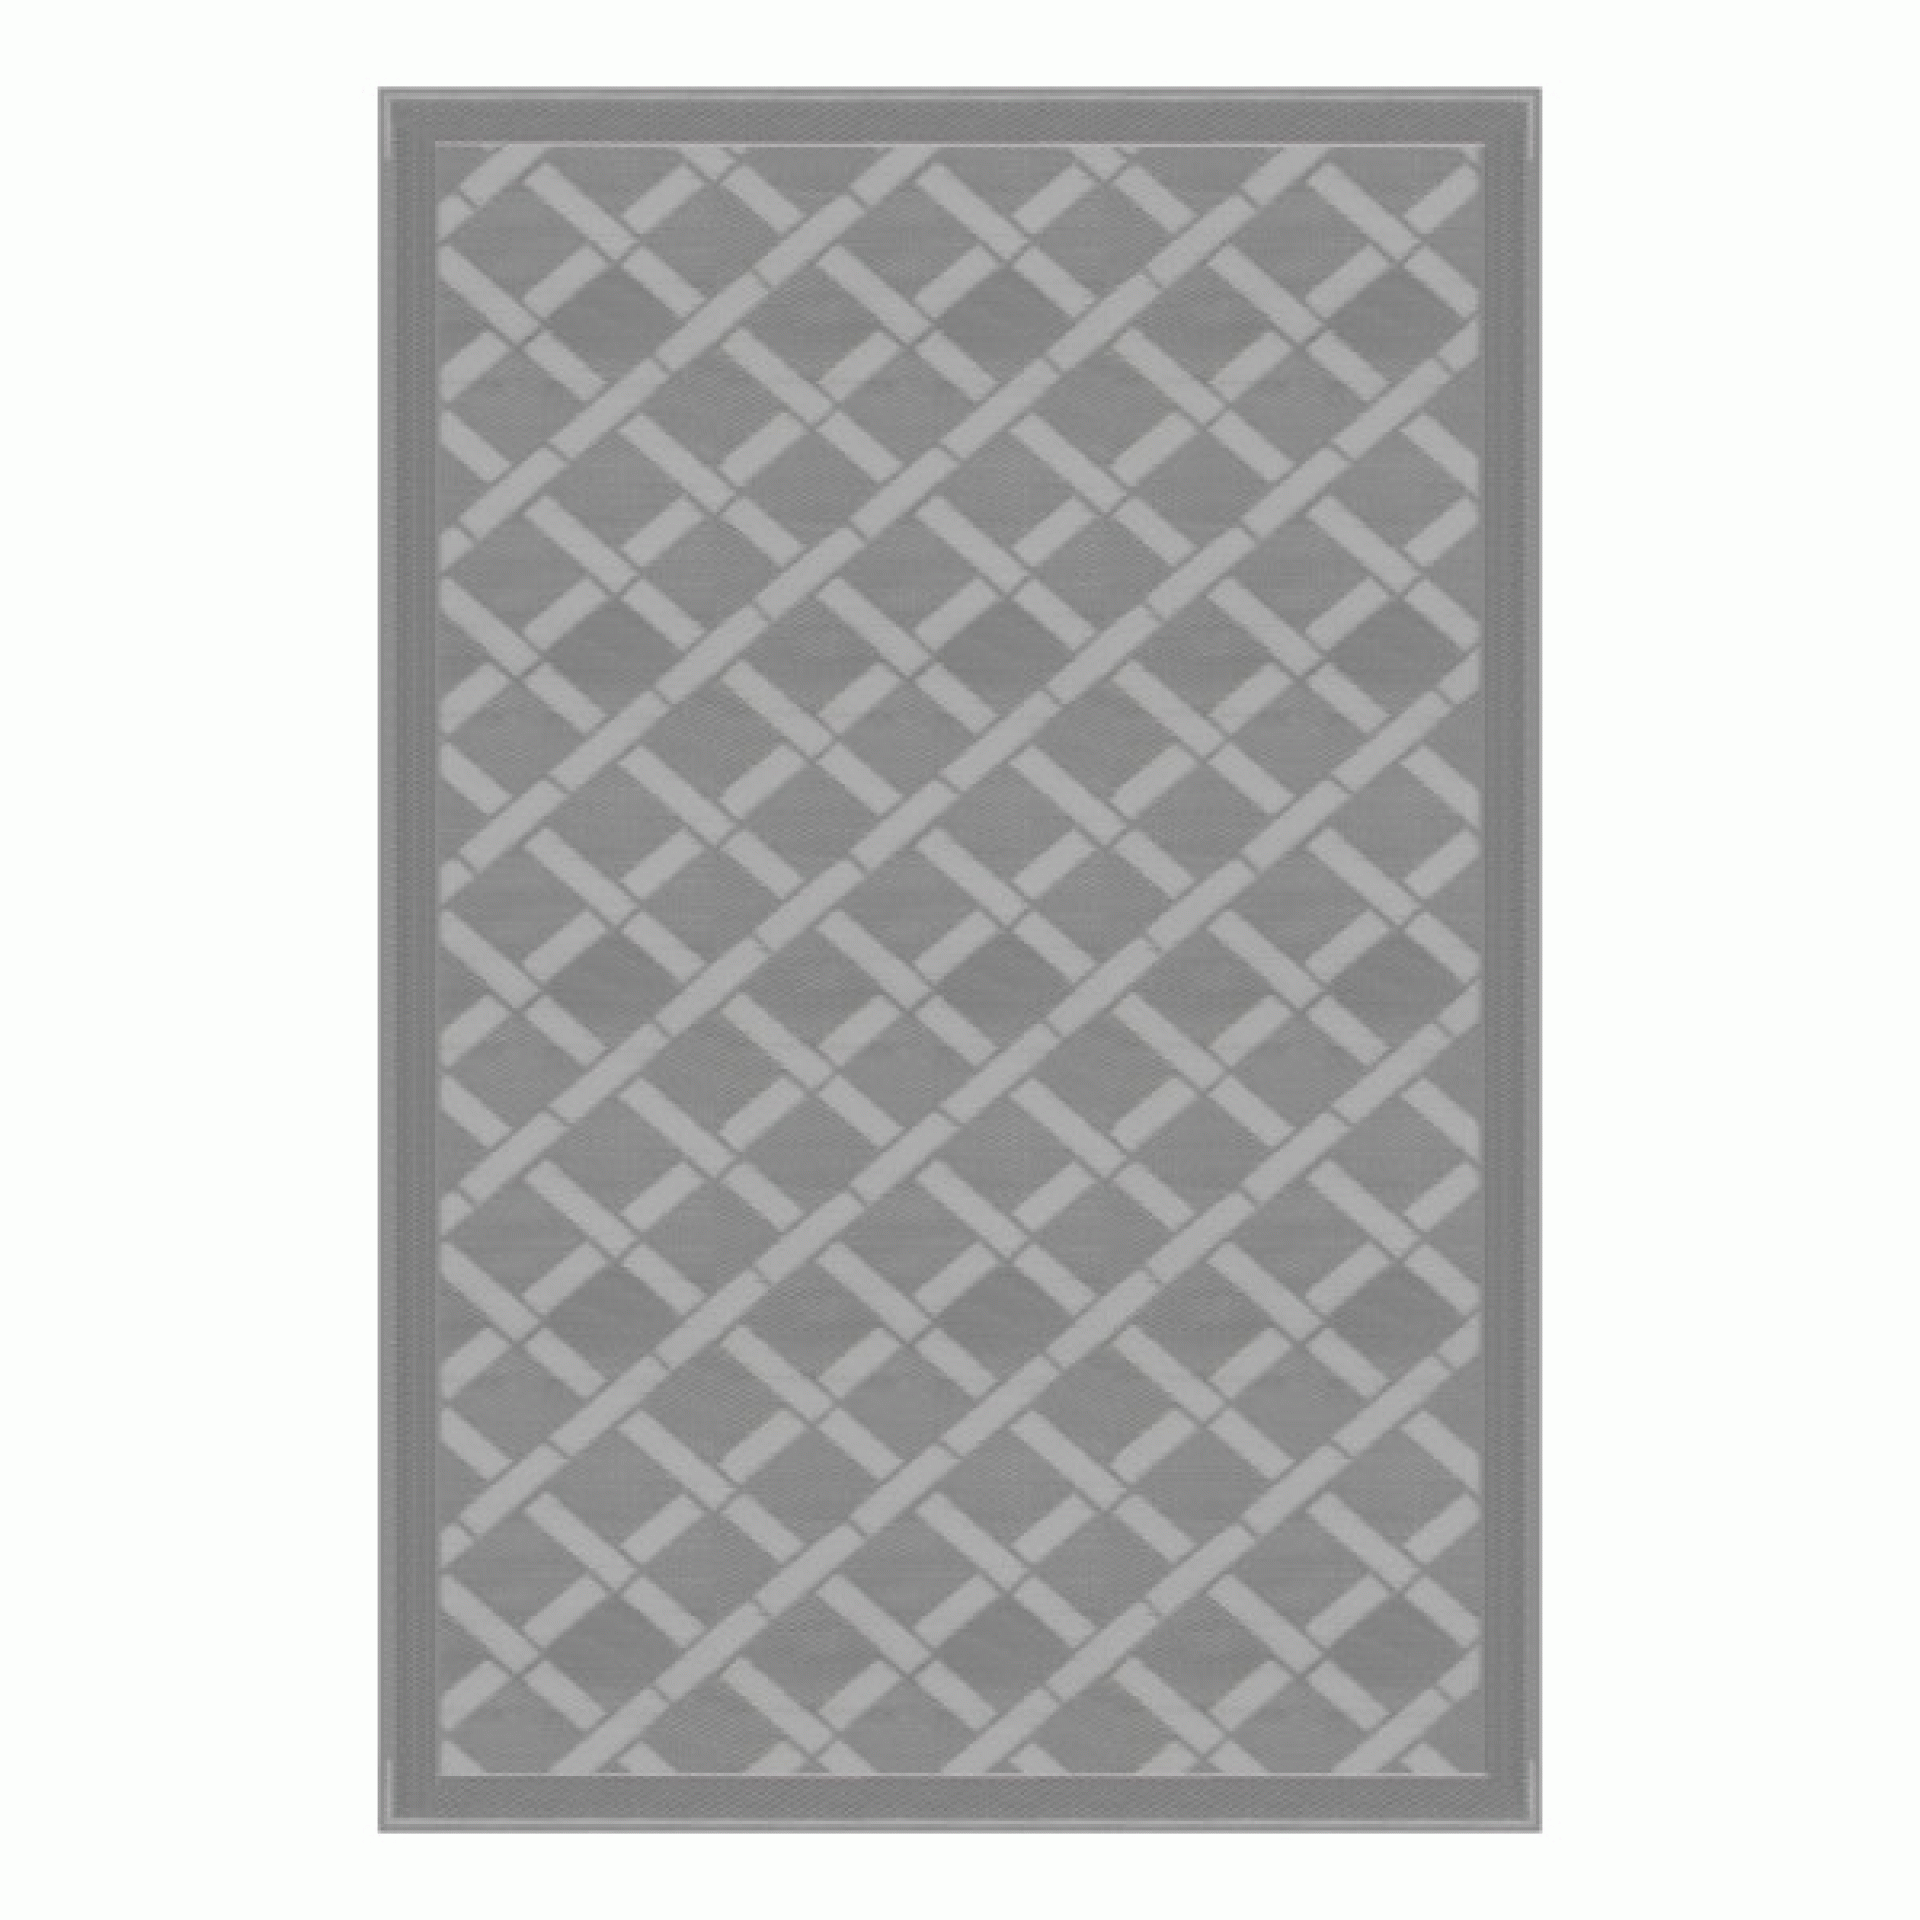 Lippert Components | 2021028006 | All Weather Patio Mat - 6' x 9' (Gray)